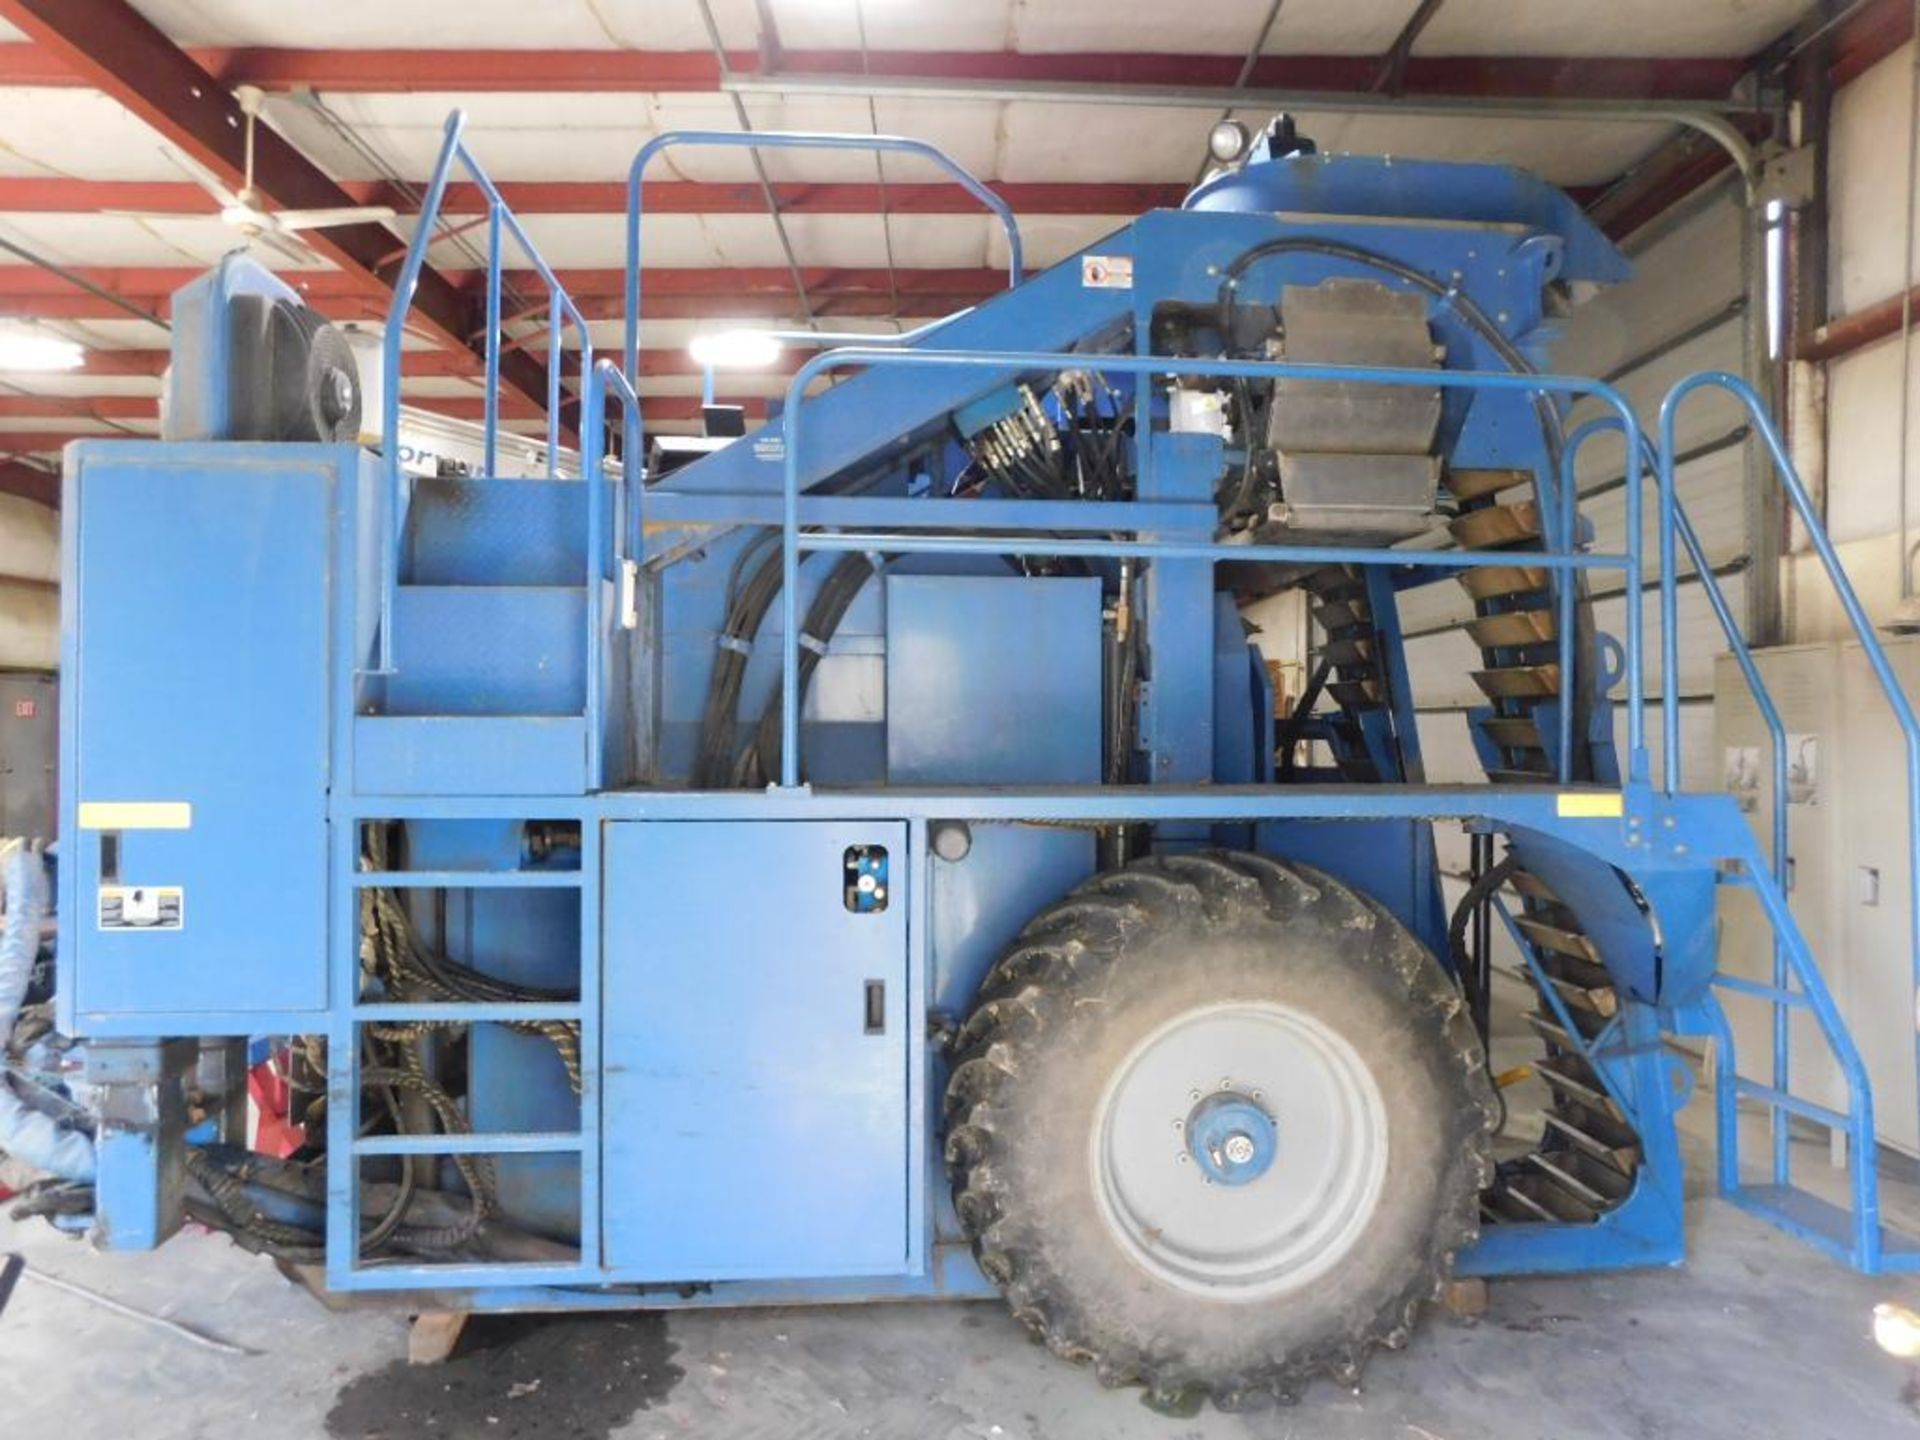 Oxbo 316XL Grape Harvester (LOCATED IN MAINTENANCE AREA) - Image 5 of 9